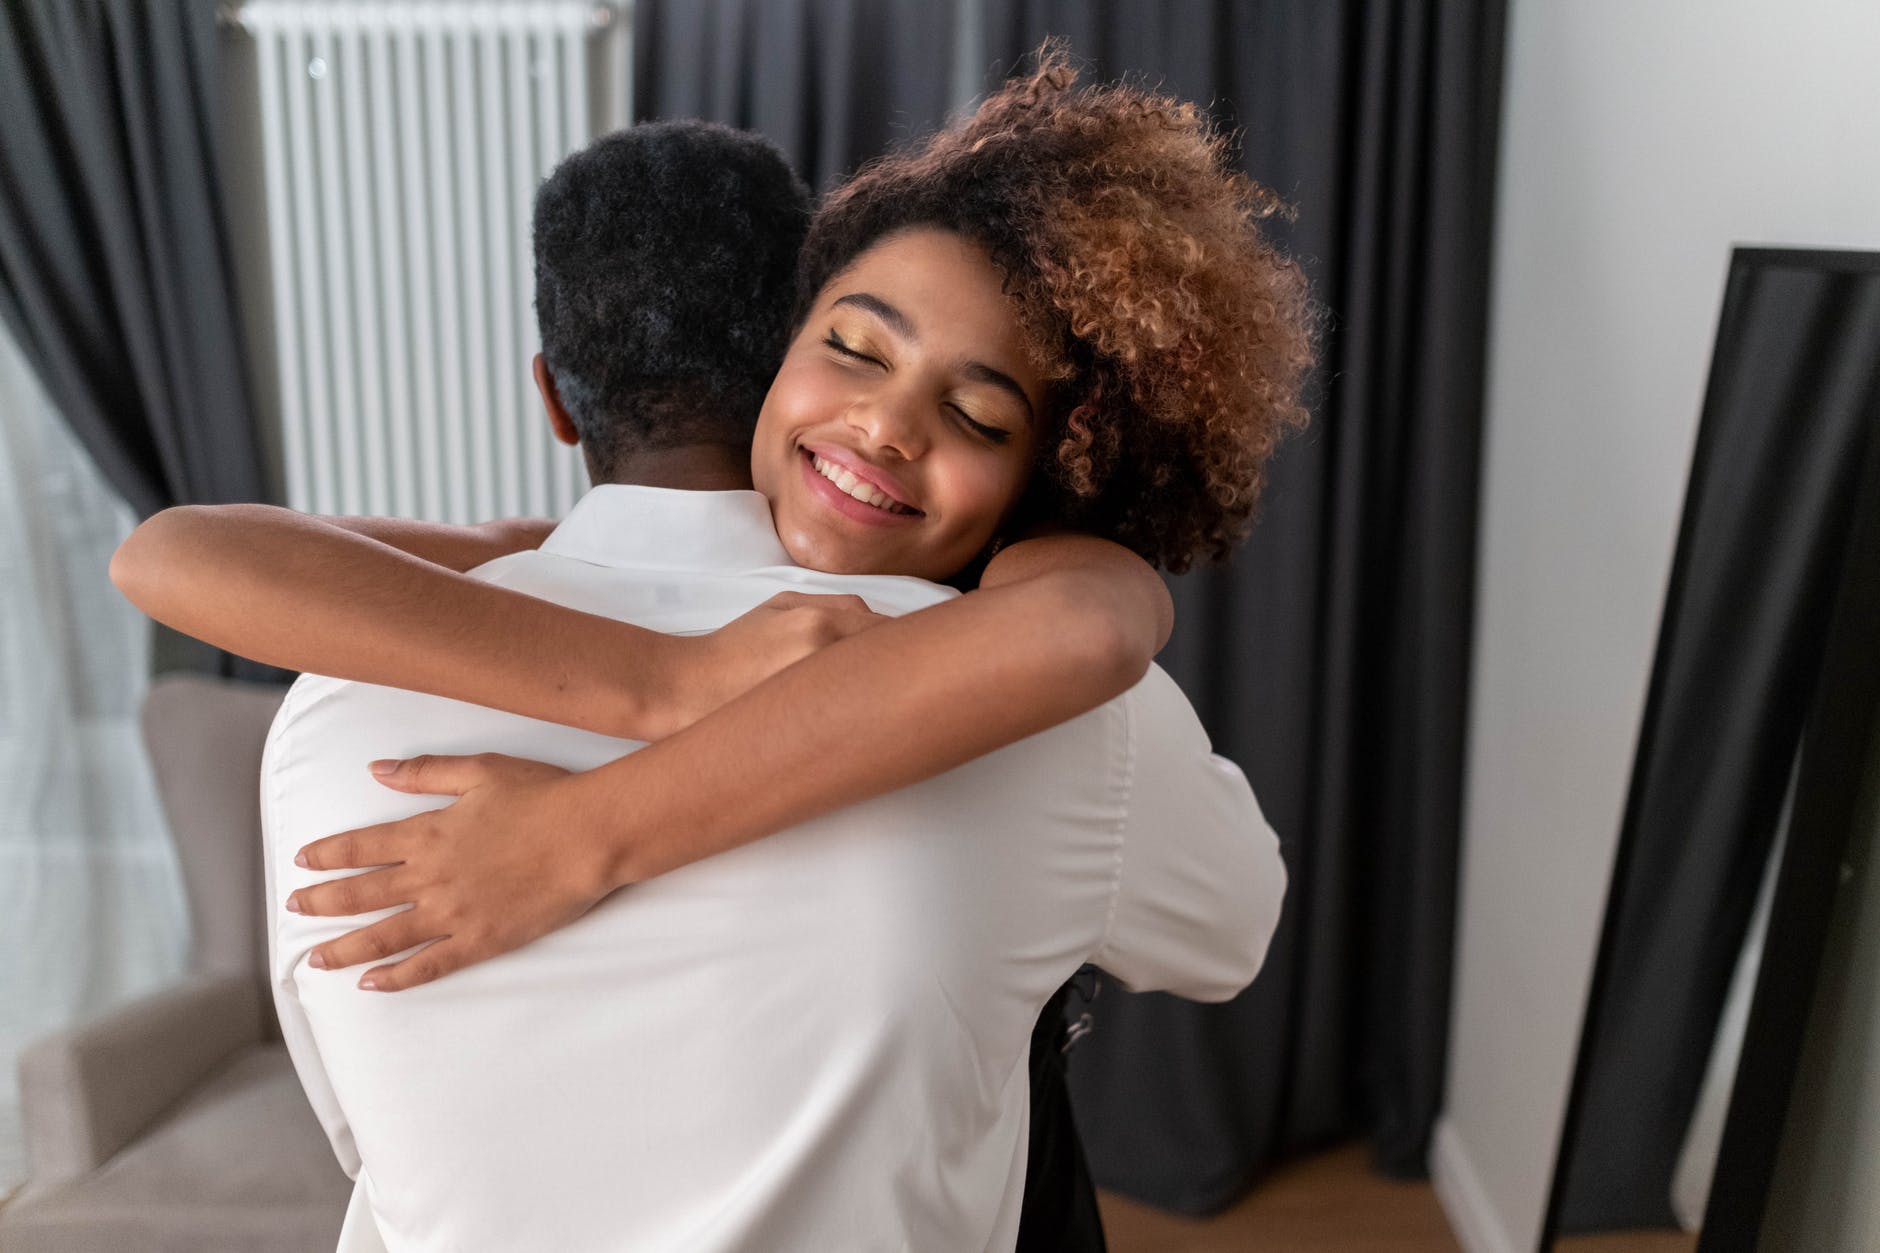 Alice hugged her dad and was never ashamed of him again. | Source: Pexels